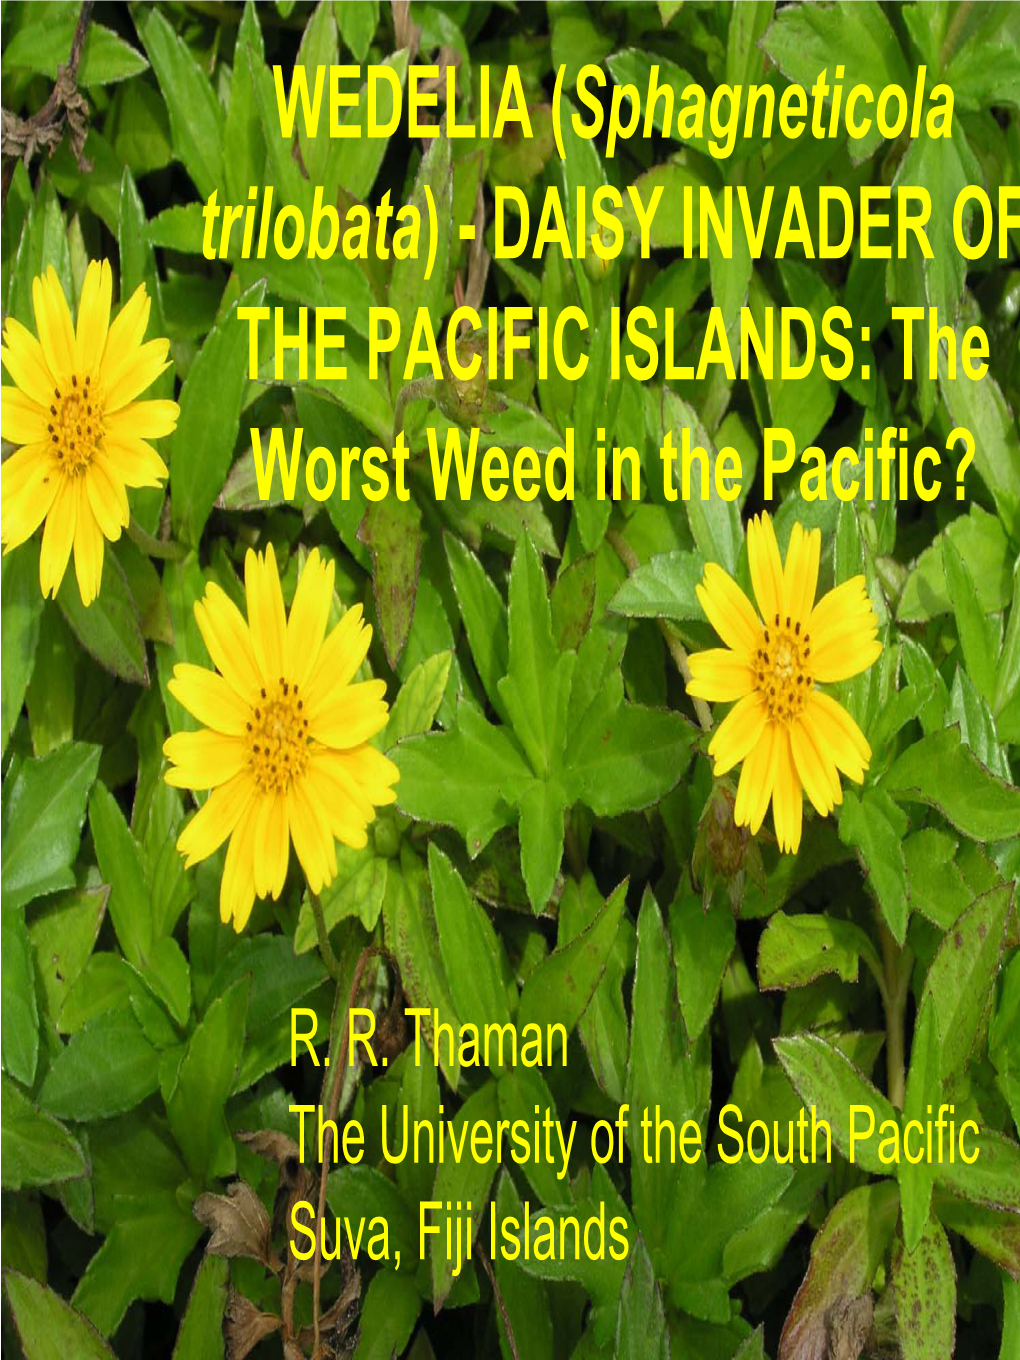 Sphagneticola Trilobata) - DAISY INVADER of the PACIFIC ISLANDS: the Worst Weed in the Pacific?